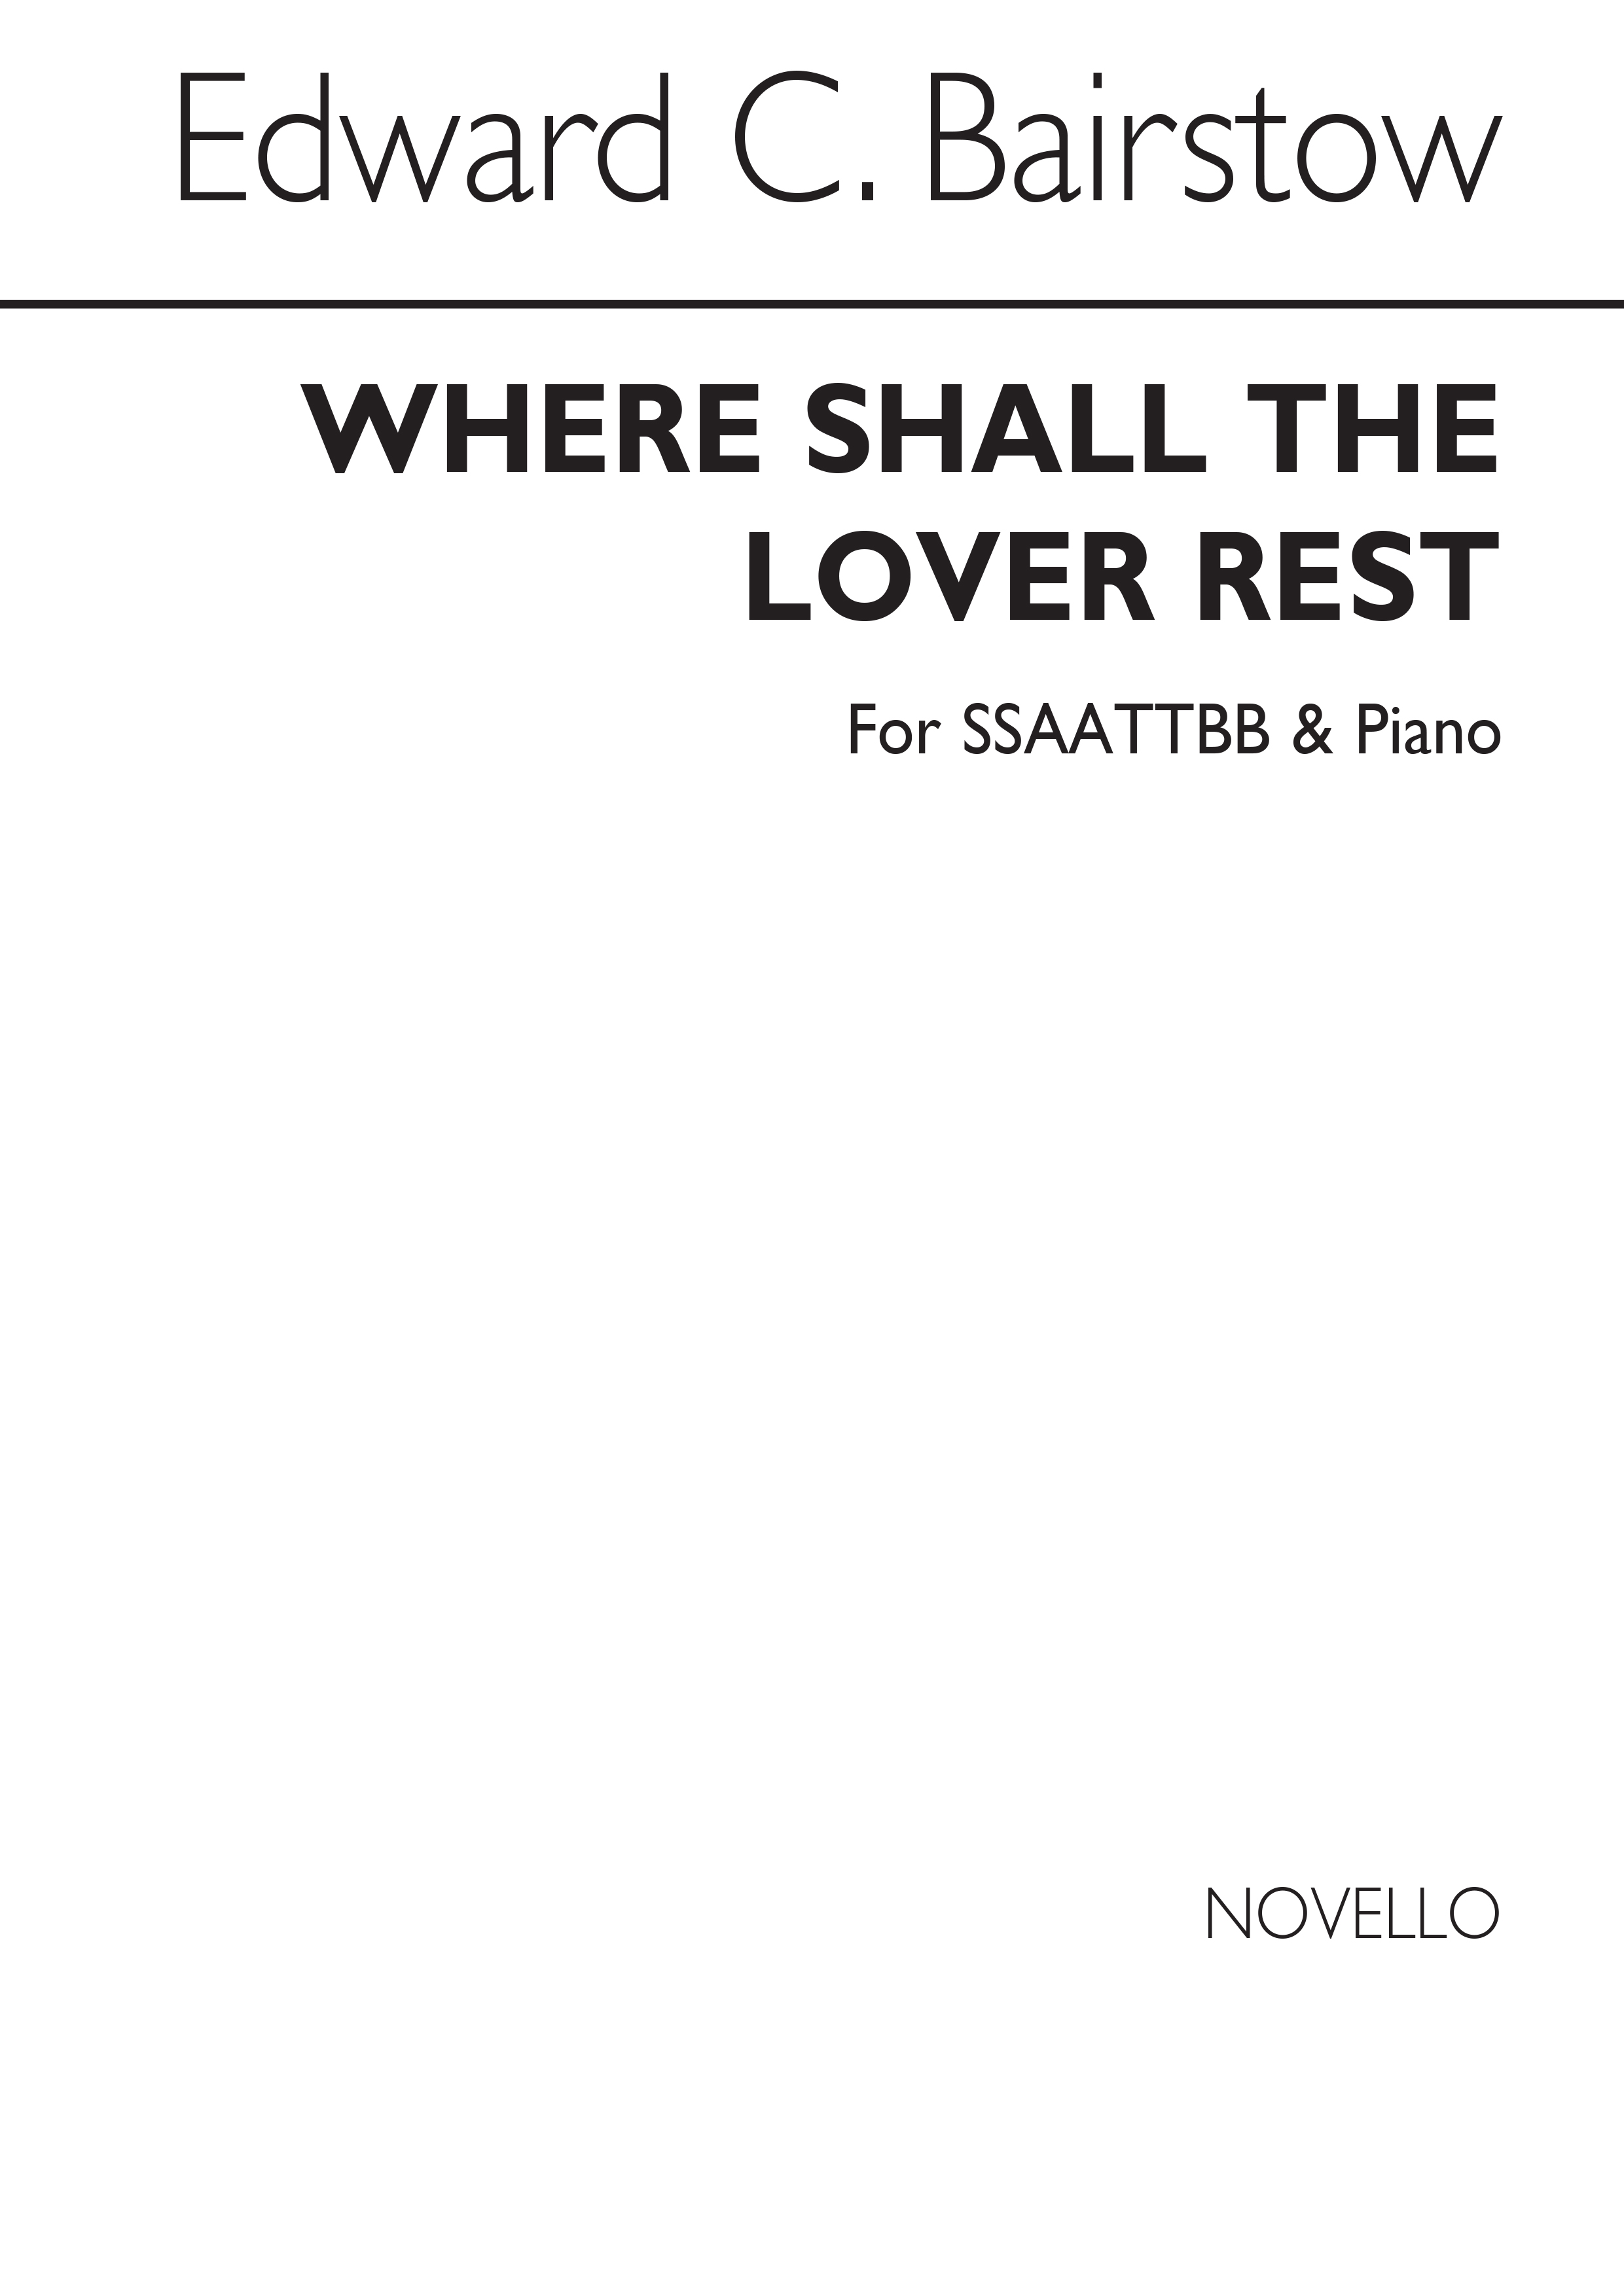 Edward Bairstow: Where Shall The Lover Rest? (SSAATTBB/Piano)